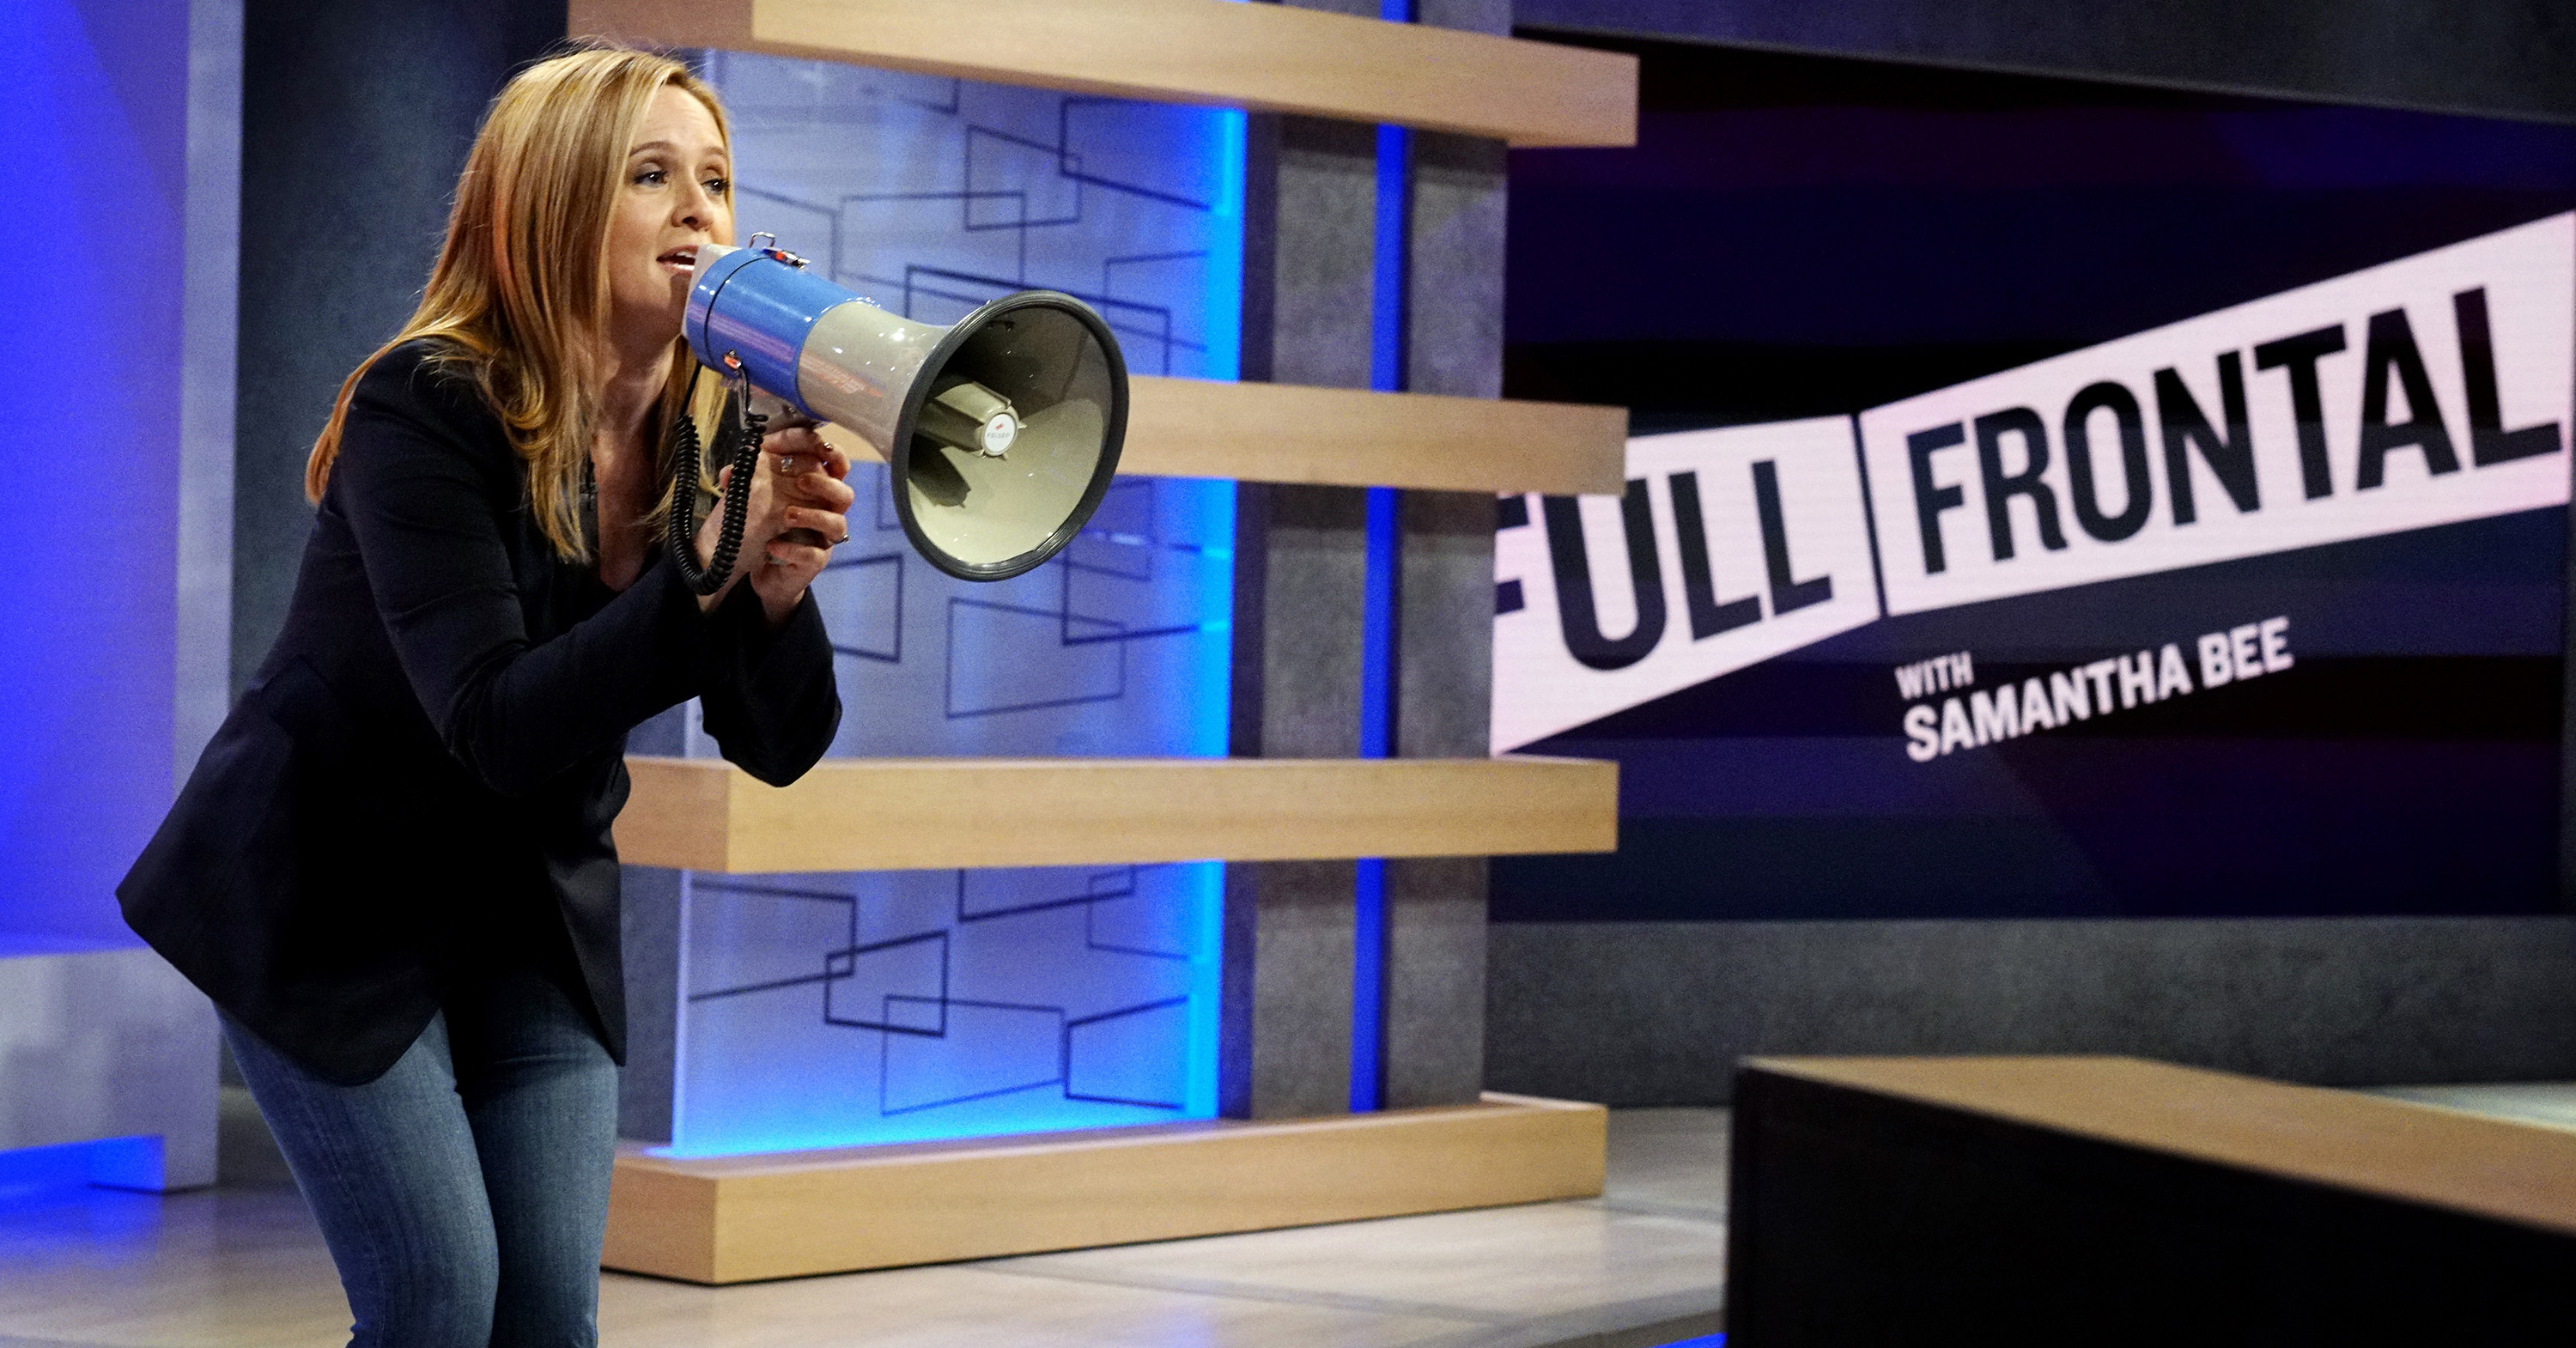 Samantha Bee Is Helping Raise Money for a Group That Rehabs White Supremacists After Trump Cut Its Funding